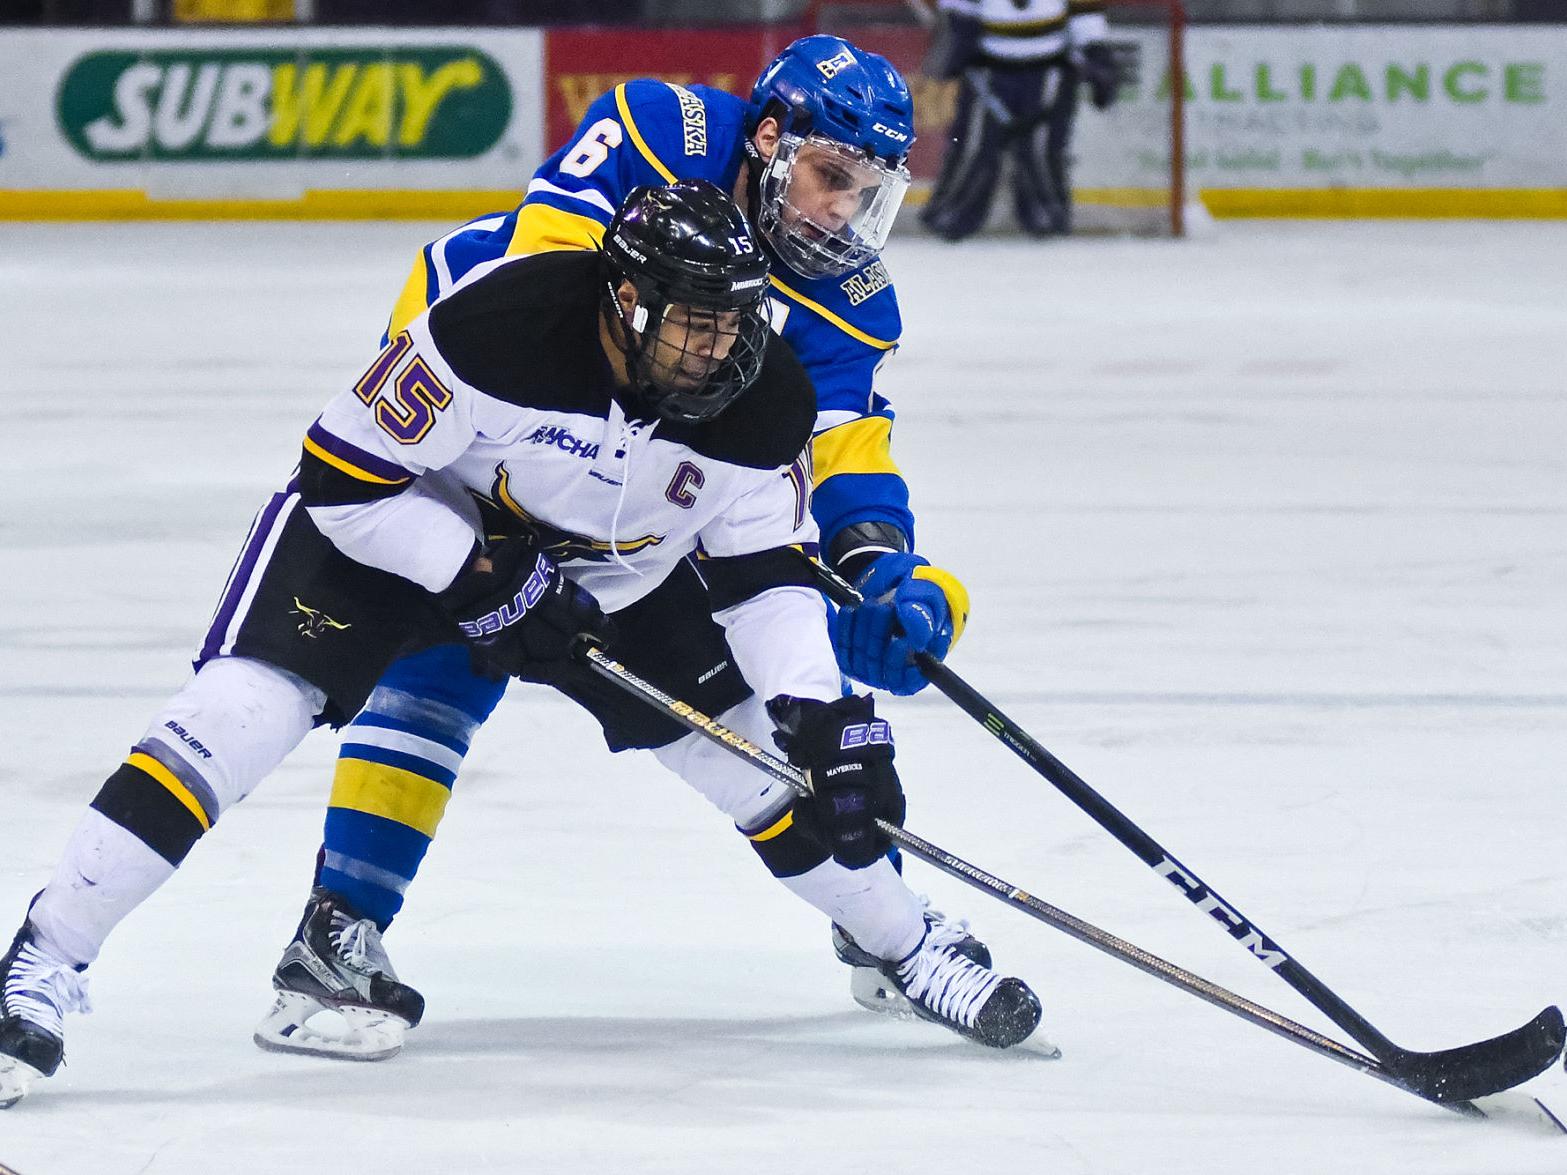 This Week in WCHA Hockey: Lake Superior State wants to 'get back to that  level' of playing for league, national championships - College Hockey